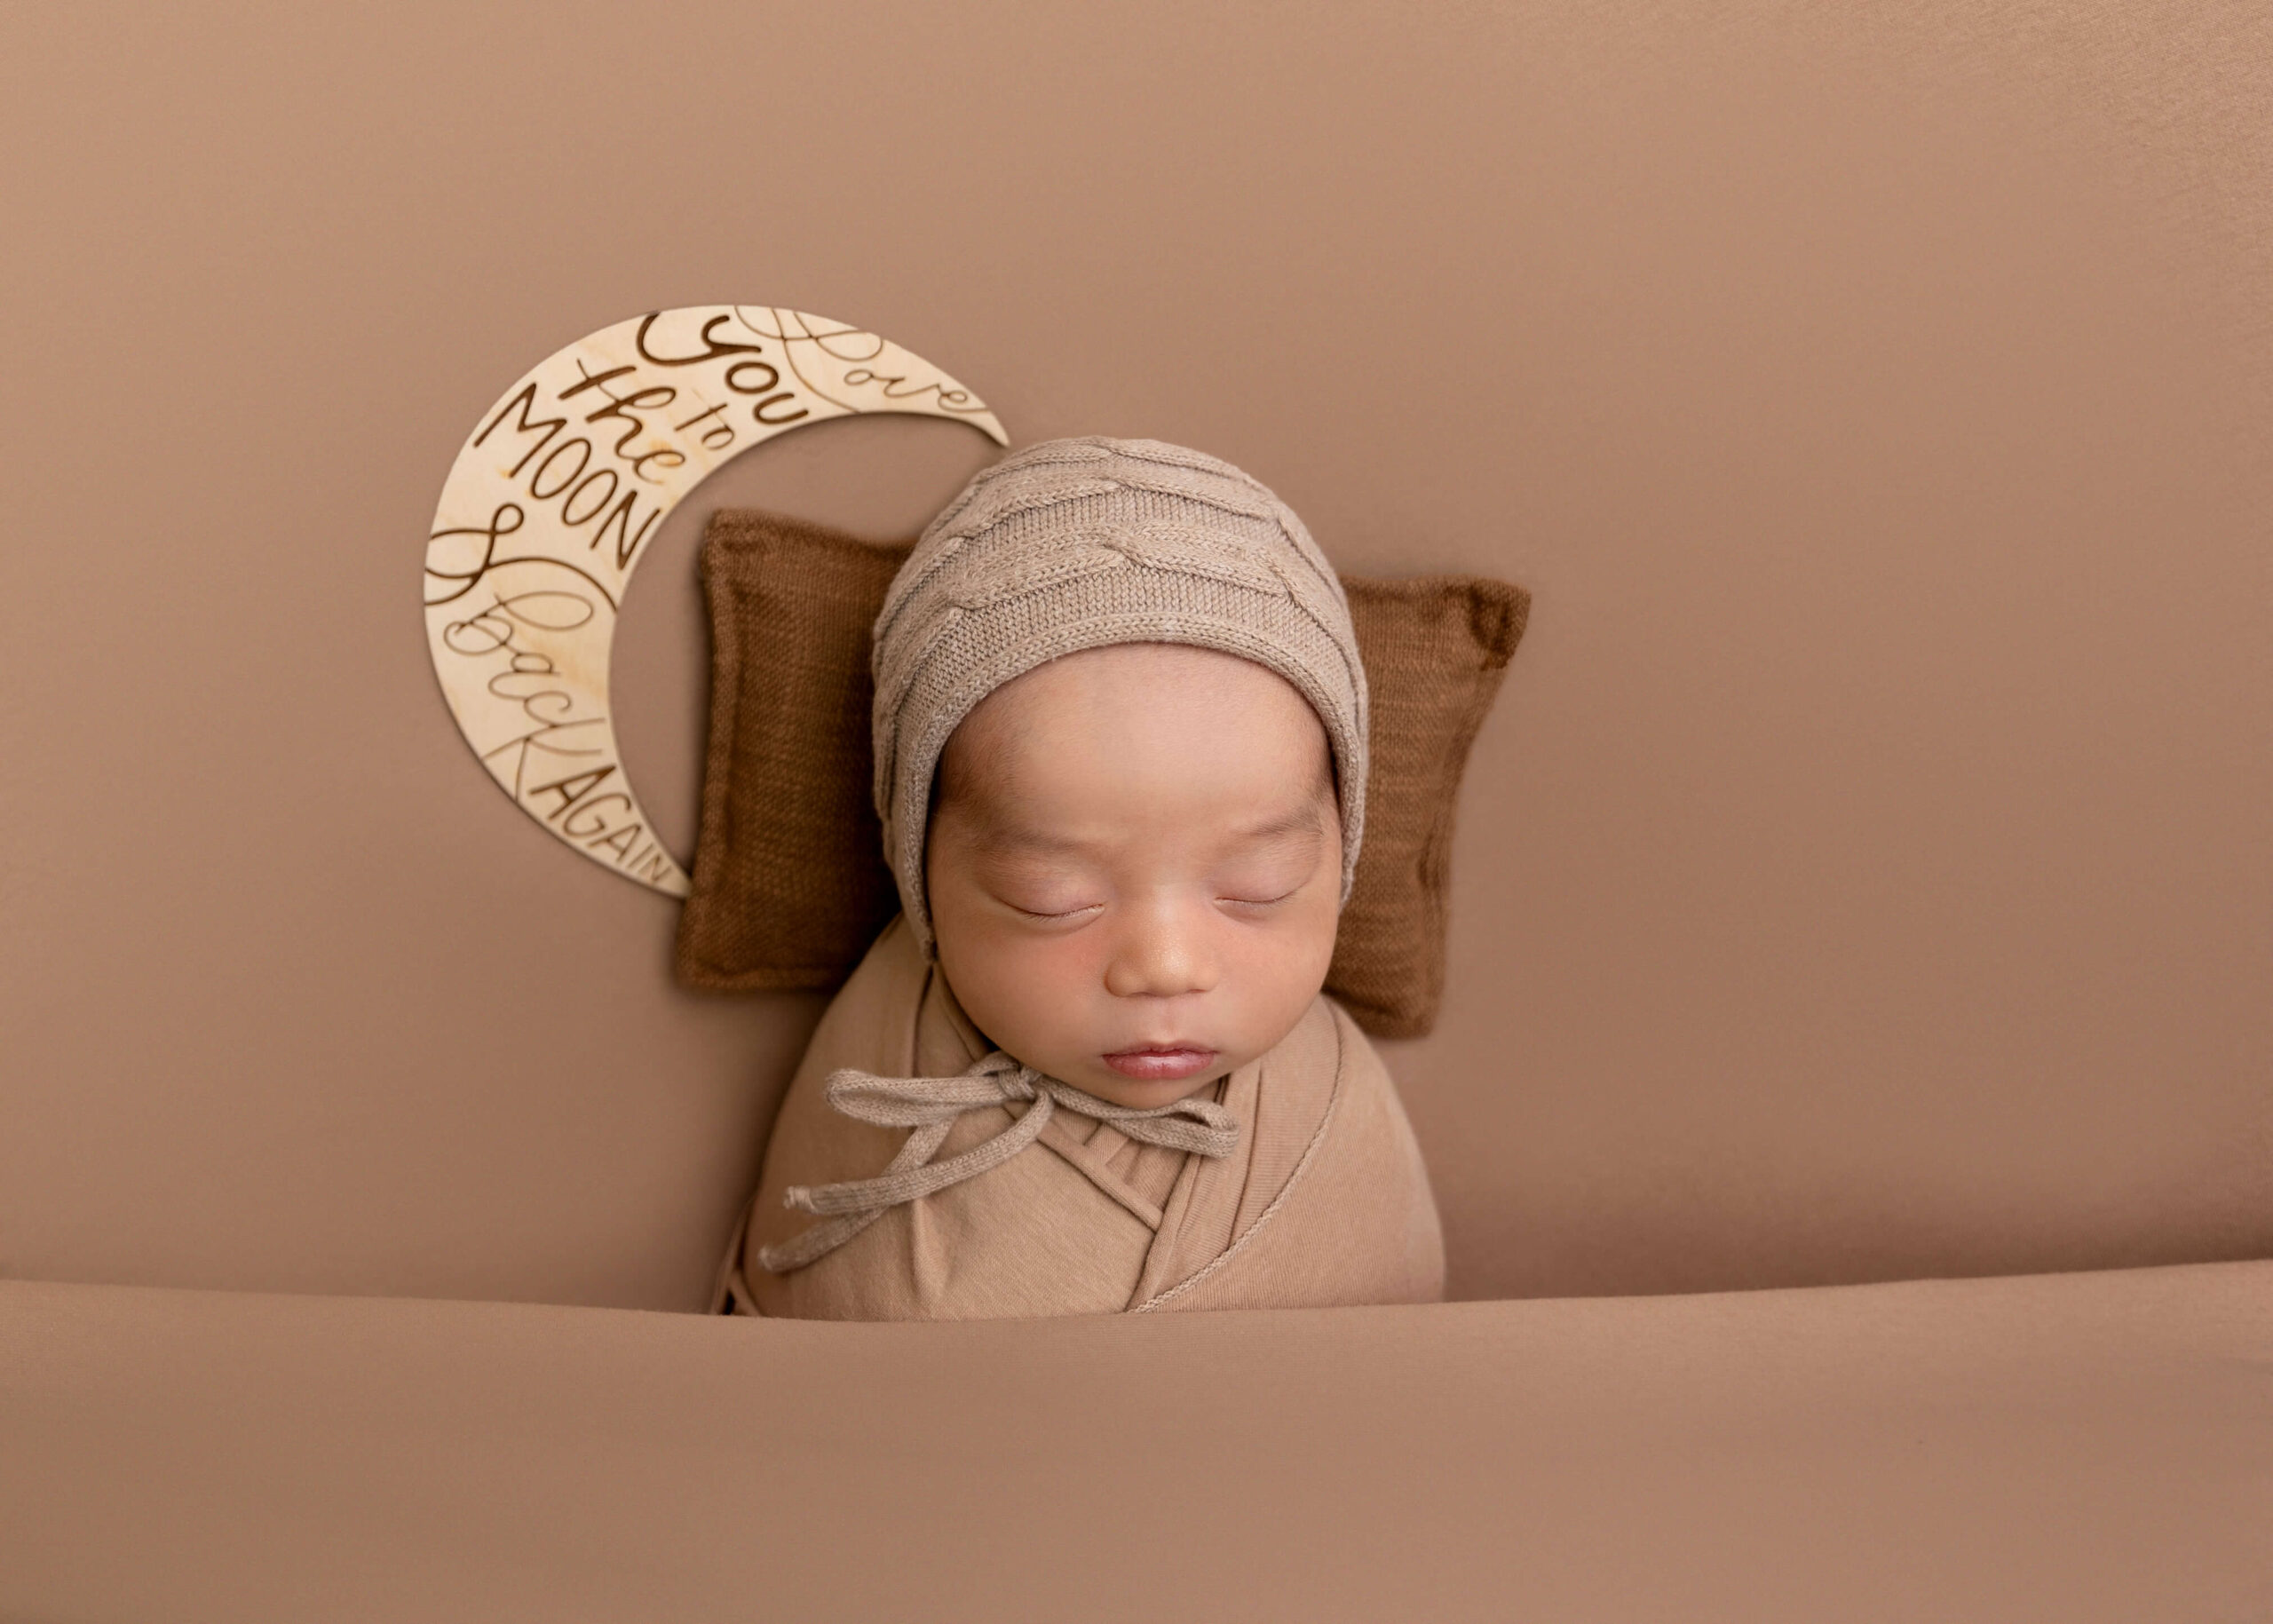 Baby posed near moon prop while being swaddled by Ashley Nicole.